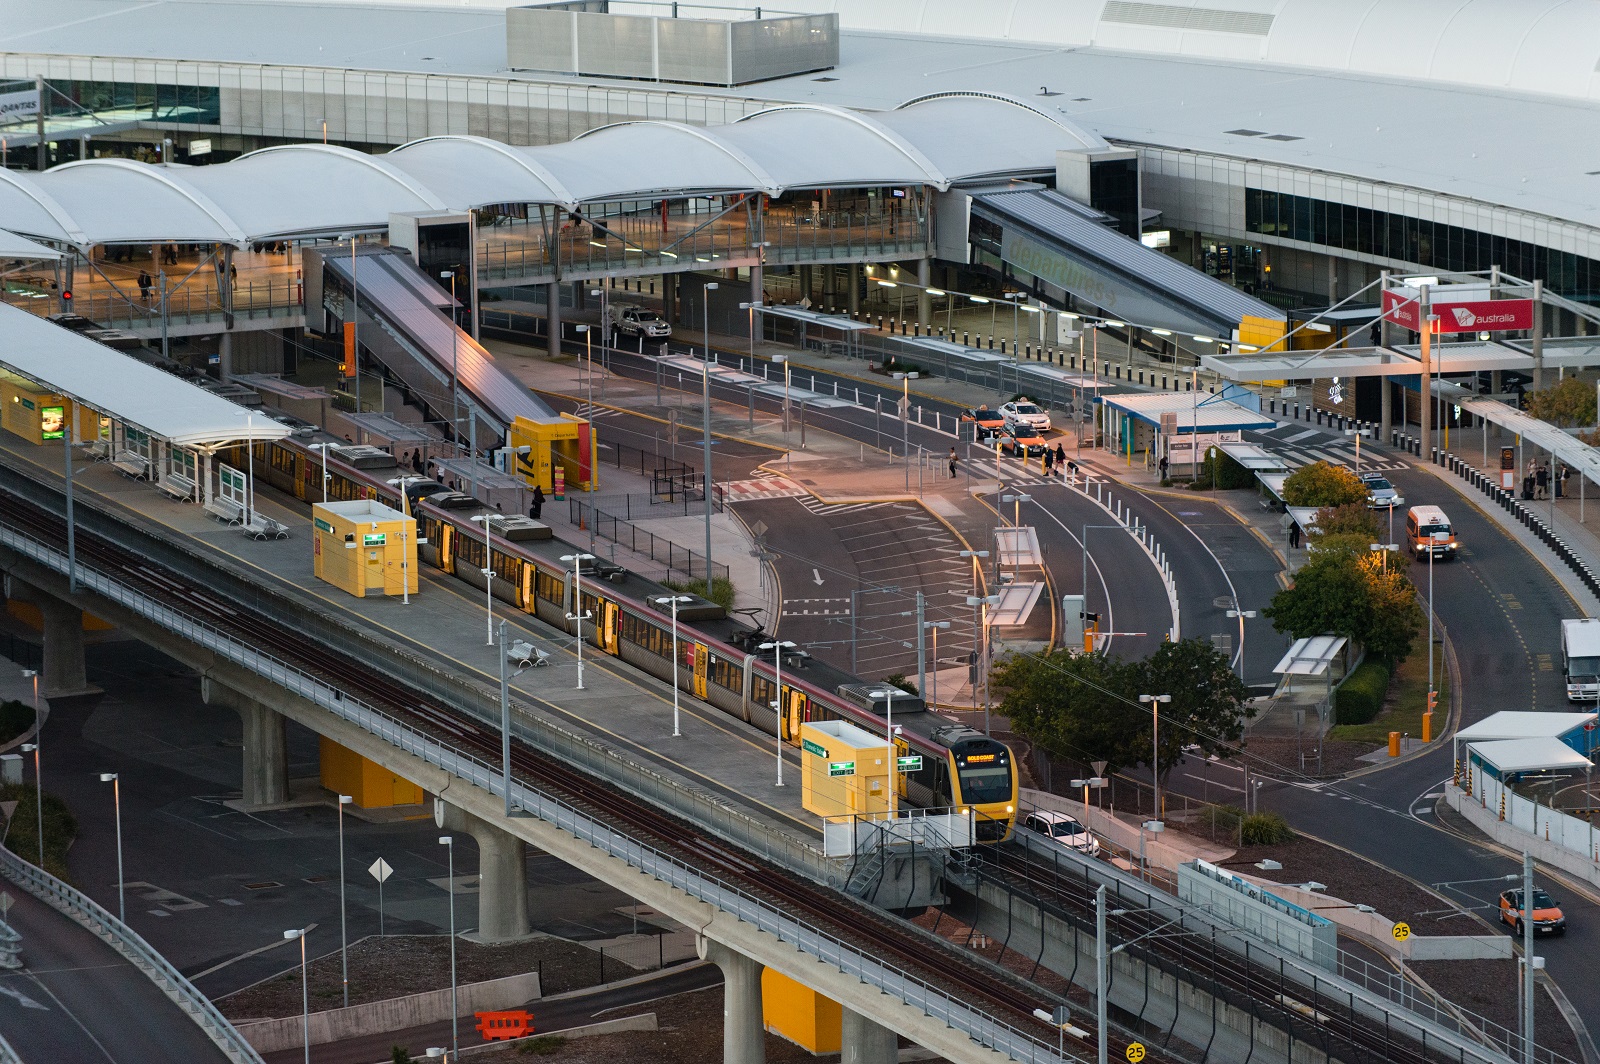 David is responsible for overseeing the land use, transport, and utilities strategies for Brisbane Airport